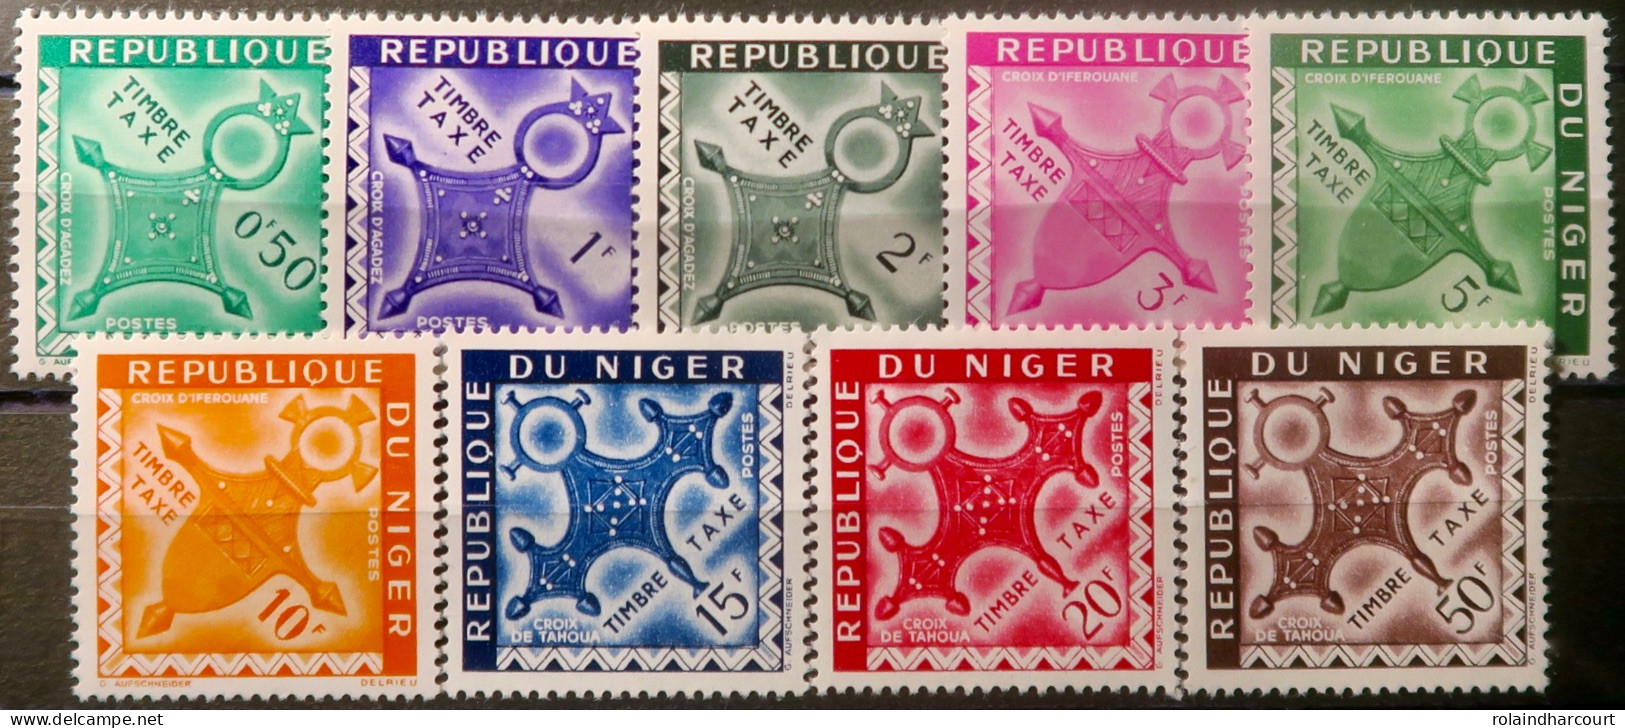 LP3844/2276 - NIGER - 1962 - TIMBRES TAXE - SERIE COMPLETE - N°22 à 30 NEUFS* - Niger (1960-...)